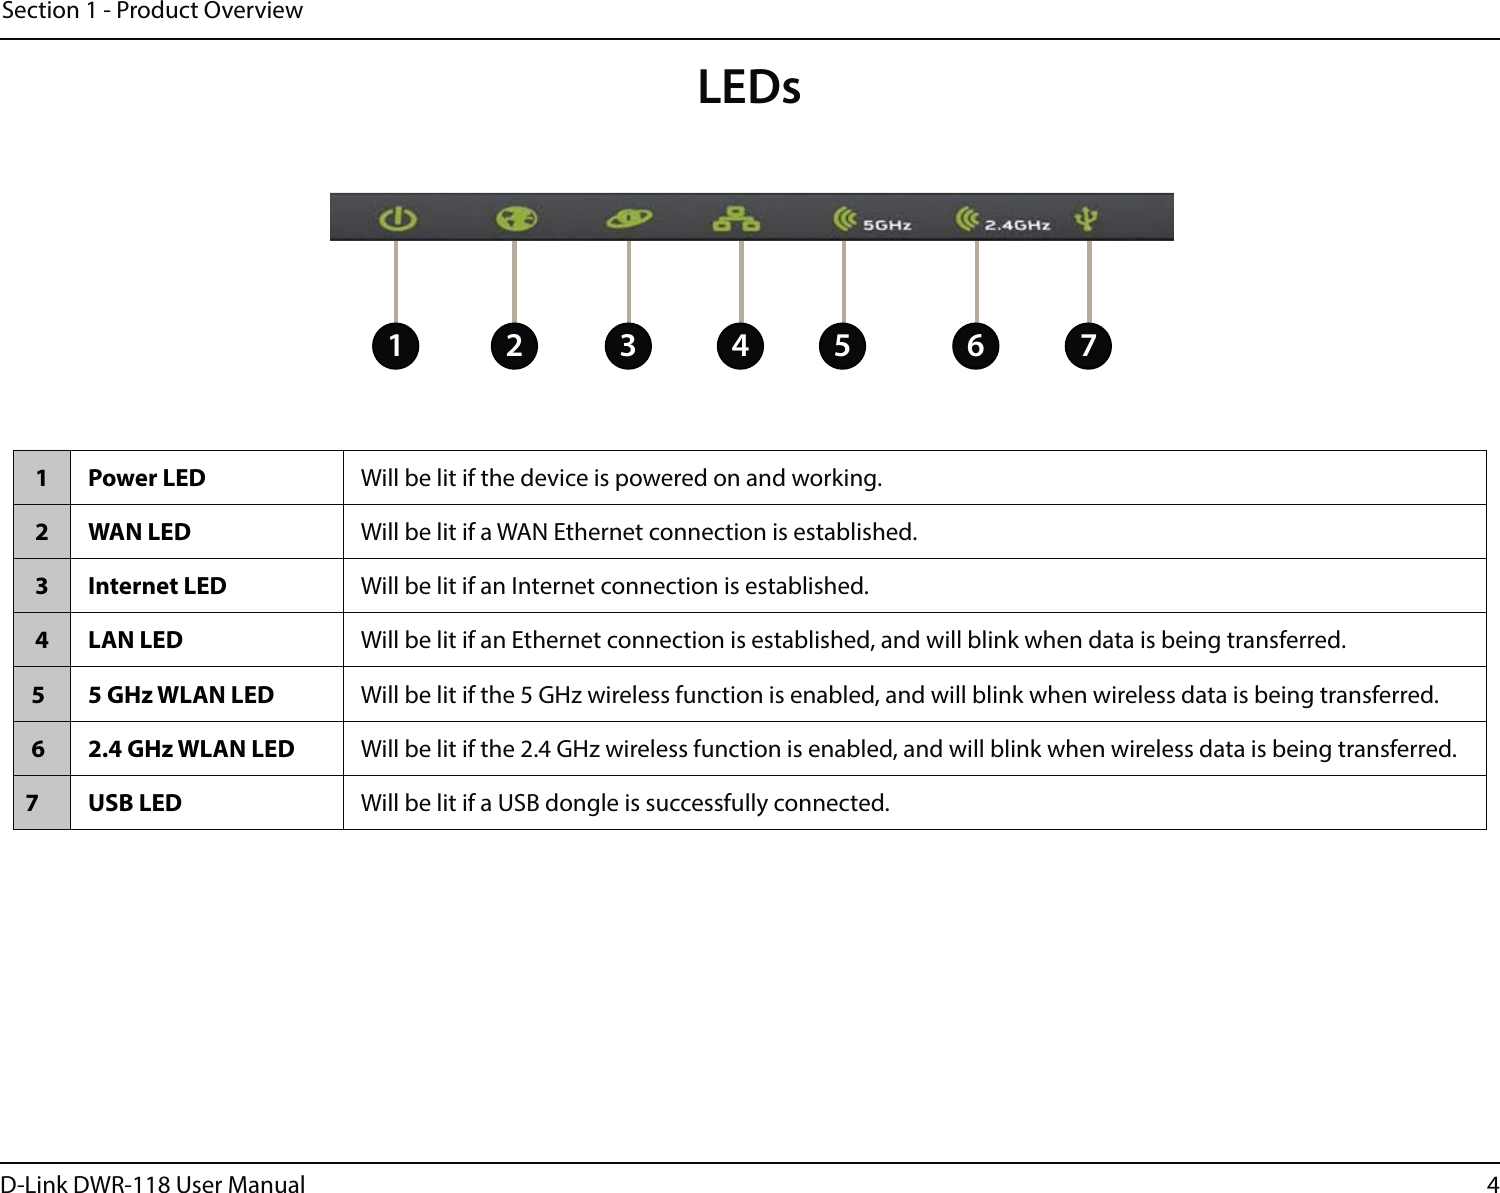 4D-Link DWR-118 User ManualSection 1 - Product OverviewLEDs1 Power LED Will be lit if the device is powered on and working.2 WAN LED Will be lit if a WAN Ethernet connection is established.3 Internet LED 8JMMCFMJUJGBO*OUFSOFUDPOOFDUJPOJTFTUBCMJTIFE4 LAN LED Will be lit if an Ethernet connection is established, and will blink when data is being transferred.5 5 GHz WLAN LED Will be lit if the 5 GHz wireless function is enabled, and will blink when wireless data is being transferred.6 2.4 GHz WLAN LED Will be lit if the 2.4 GHz wireless function is enabled, and will blink when wireless data is being transferred.7 USB LED Will be lit if a USB dongle is successfully connected.1 3 4 5 762